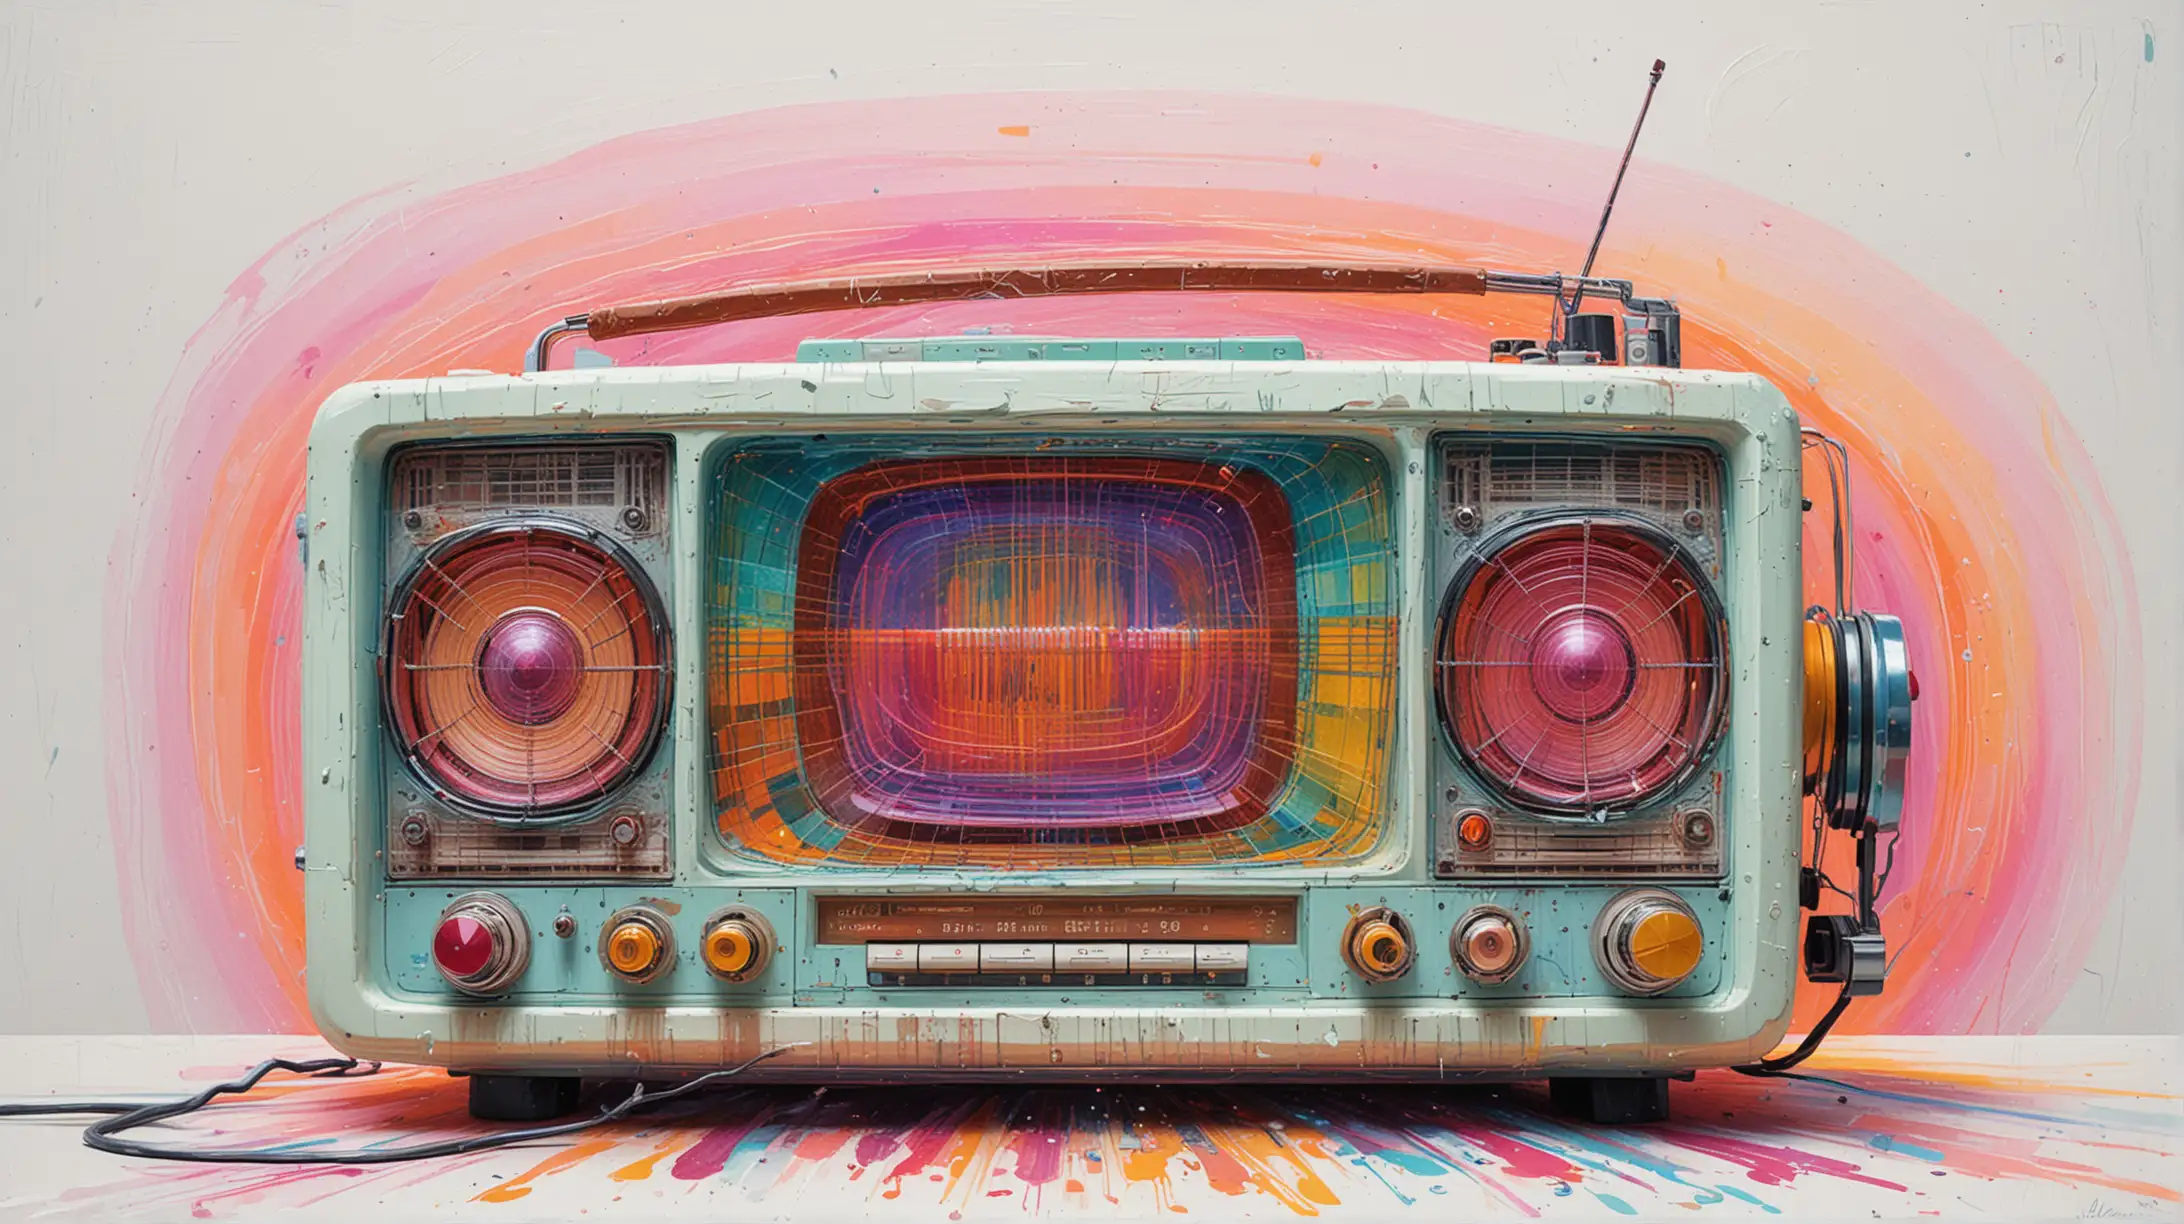 An abstract psychedelic painting of a large old time radio in the foreground against a textured white background, vivid neon colors, wild and ethereal.